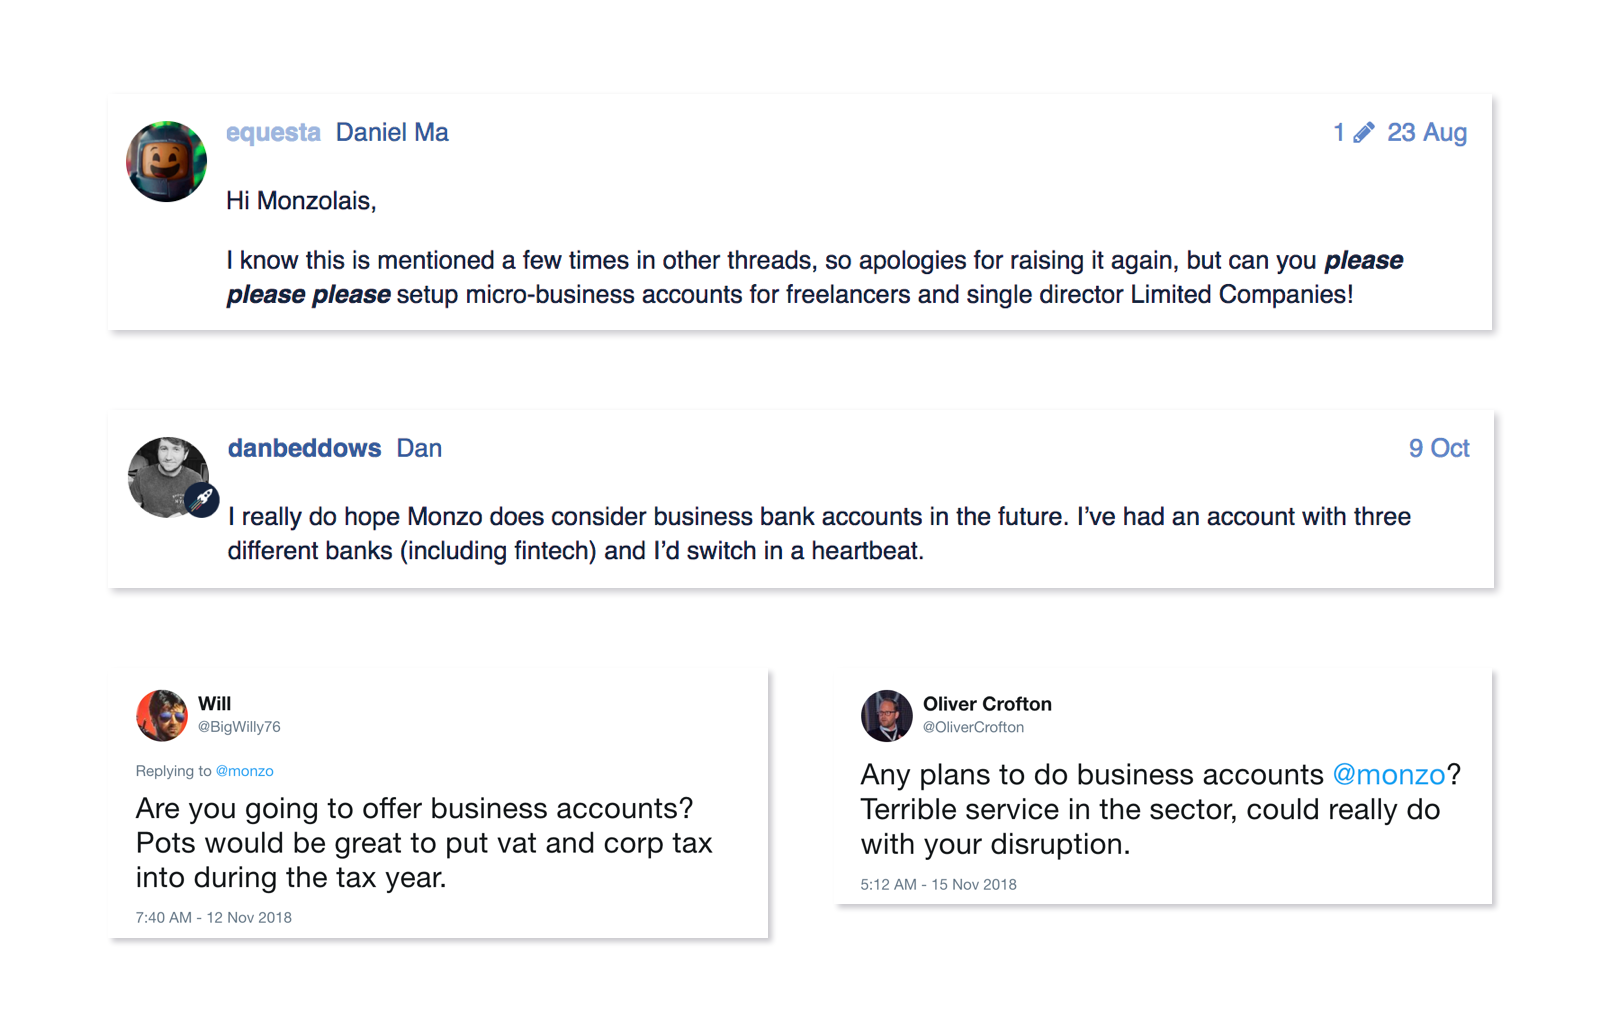 Community forum comments asking if Monzo is going to do business accounts